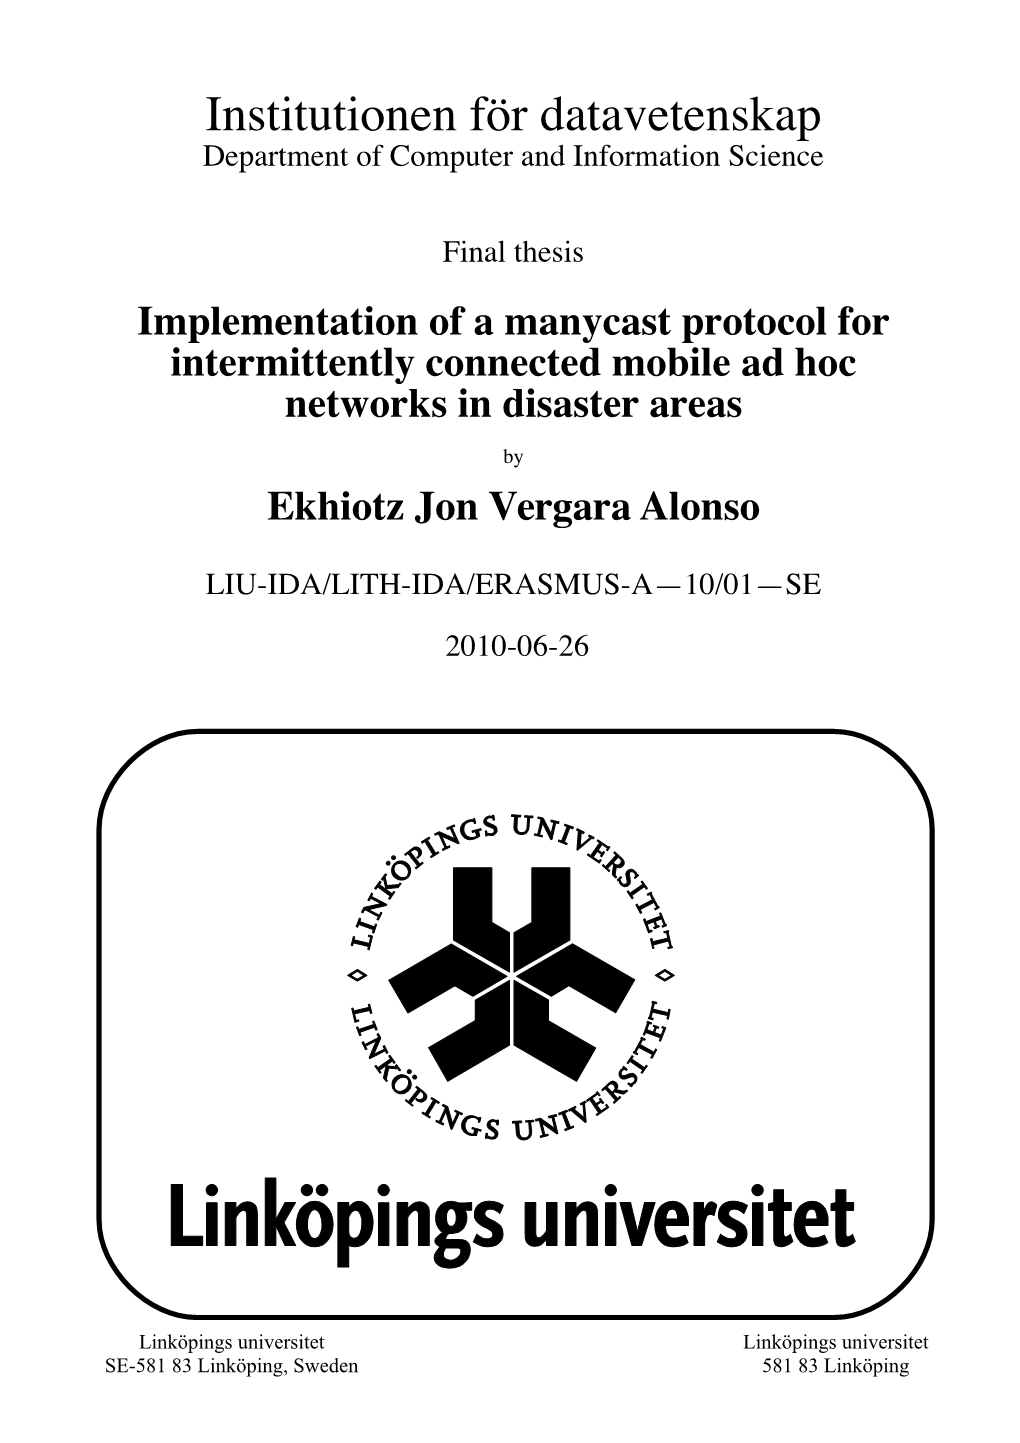 Implementation of a Manycast Protocol for Intermittently Connected Mobile Ad Hoc Networks in Disaster Areas by Ekhiotz Jon Vergara Alonso